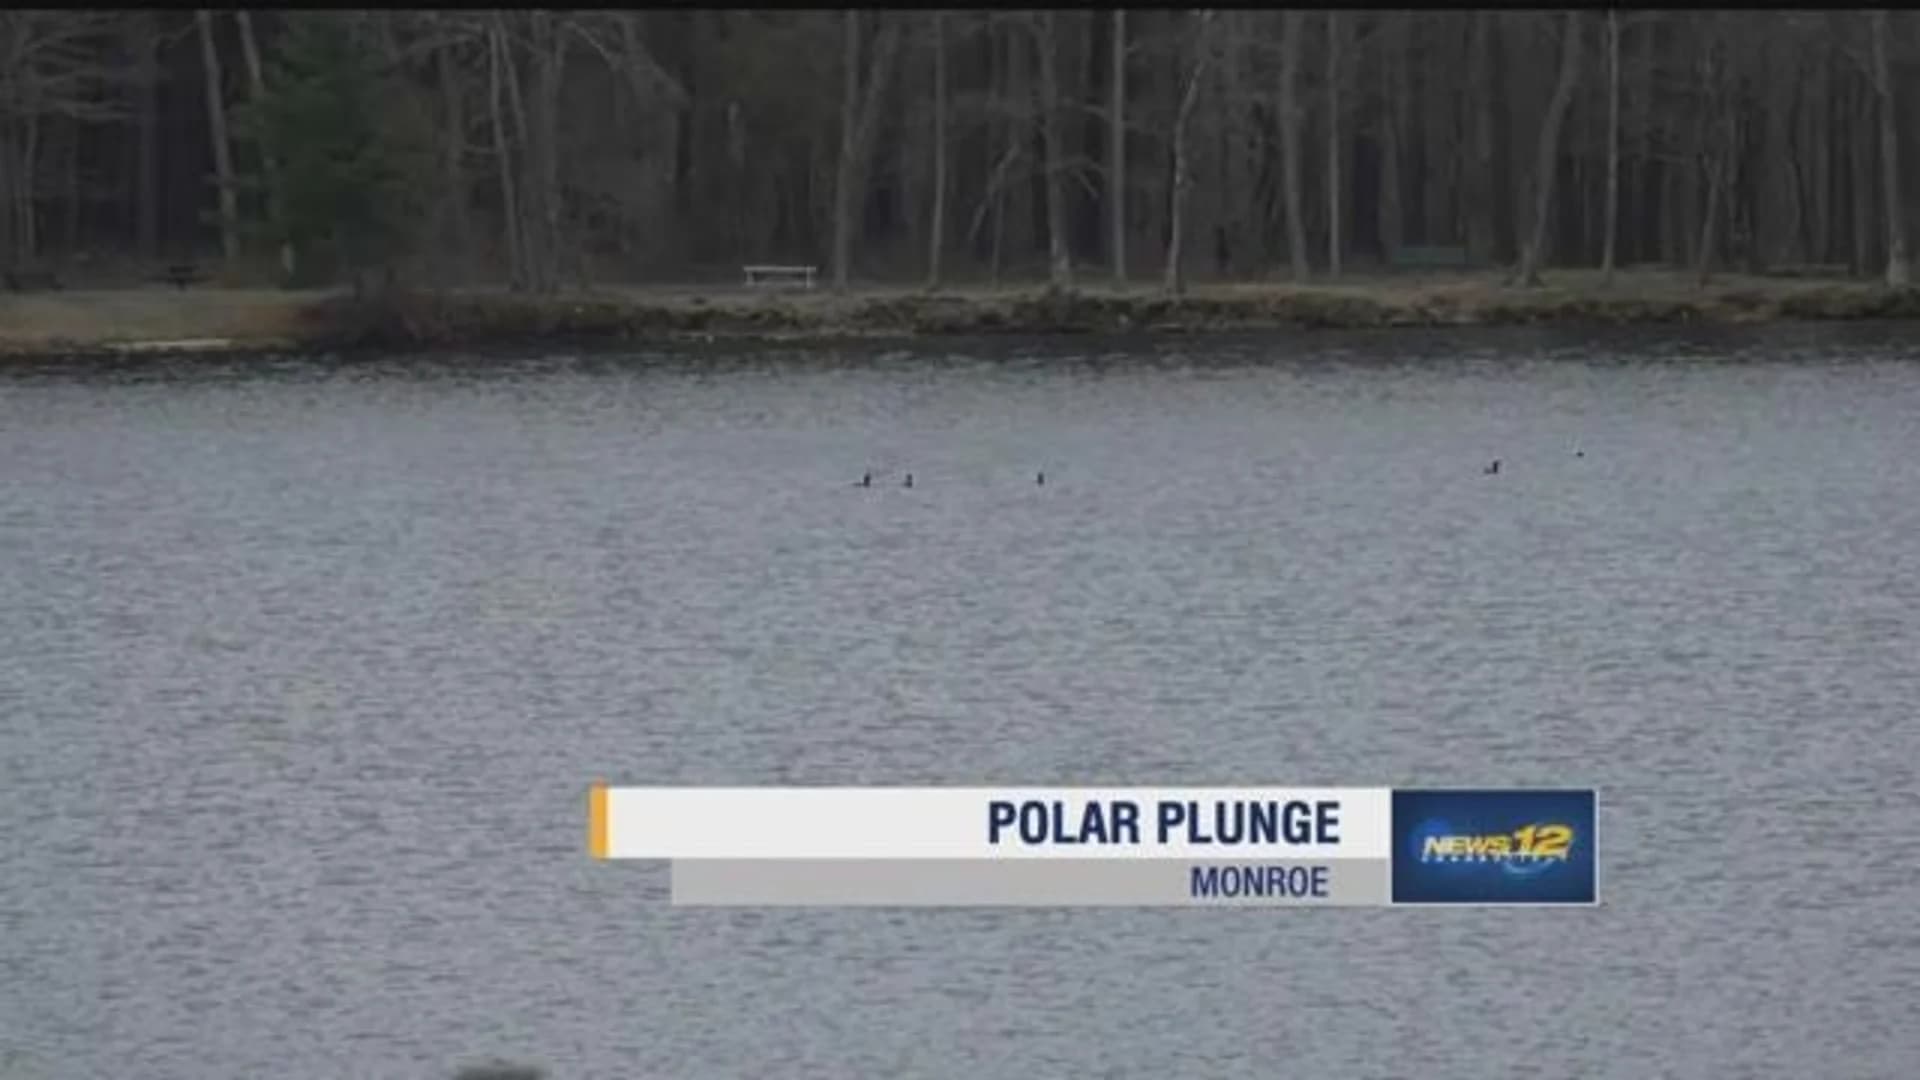 Polar plunge in Monroe helps fund CT Special Olympics